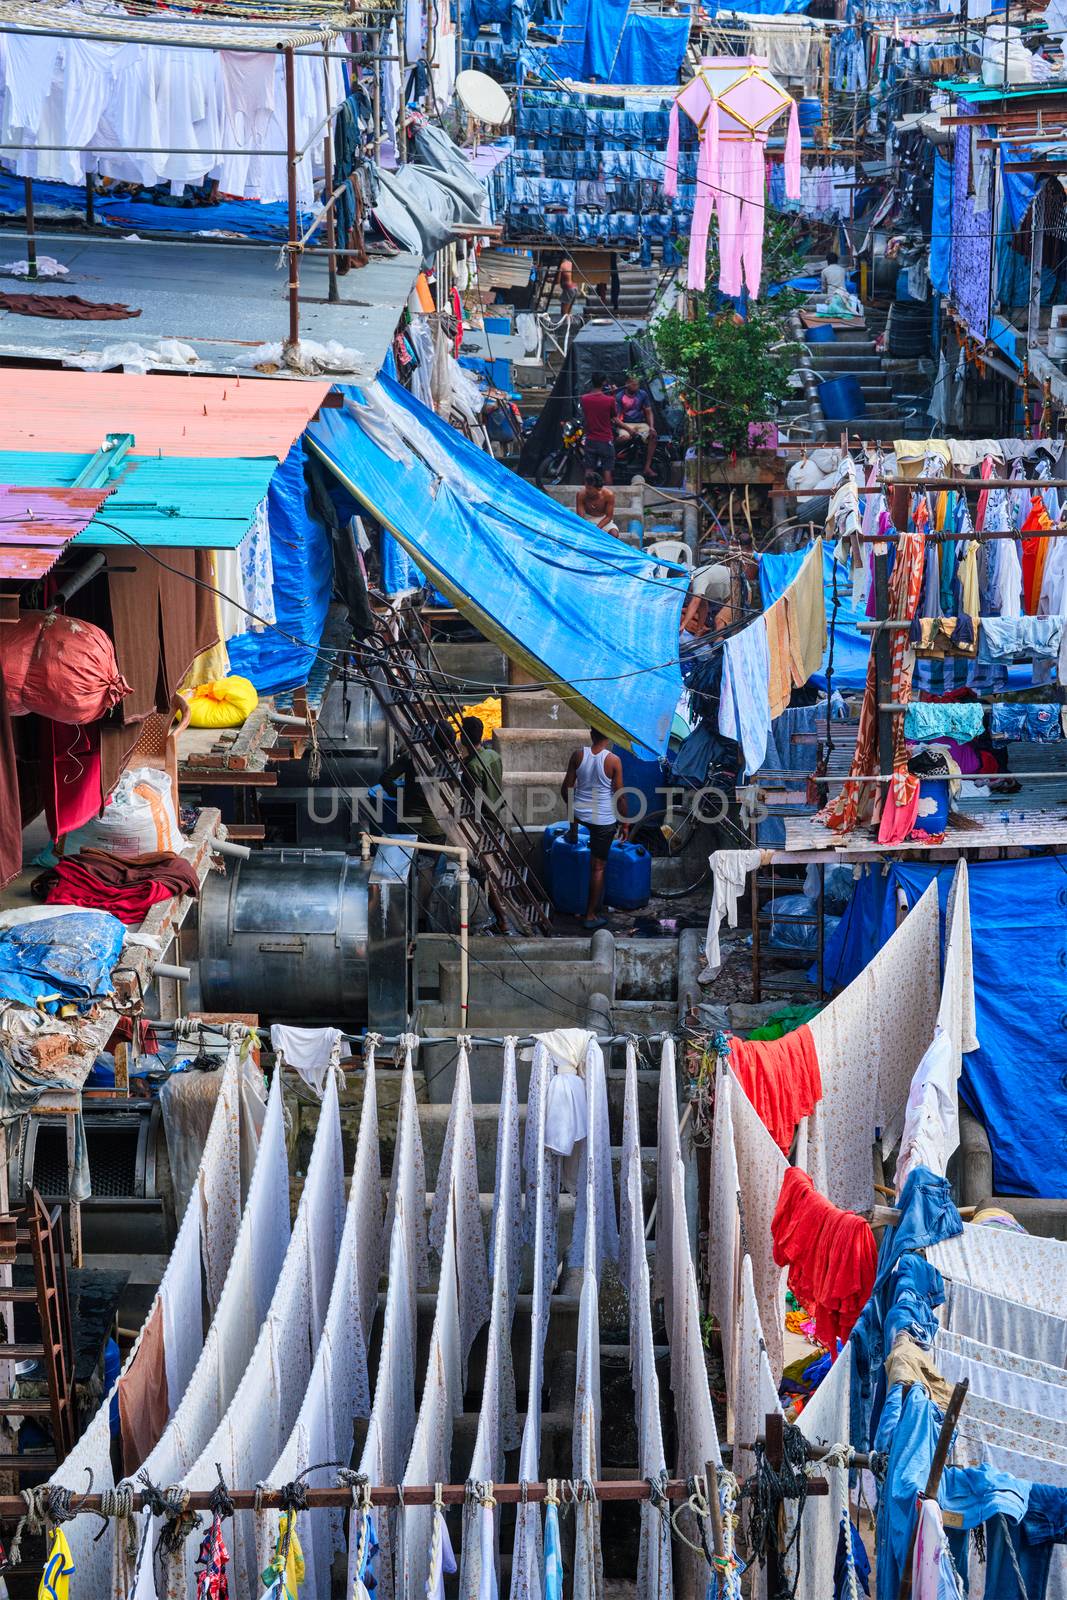 Dhobi Ghat is an open air laundromat lavoir in Mumbai, India with laundry drying on ropes by dimol